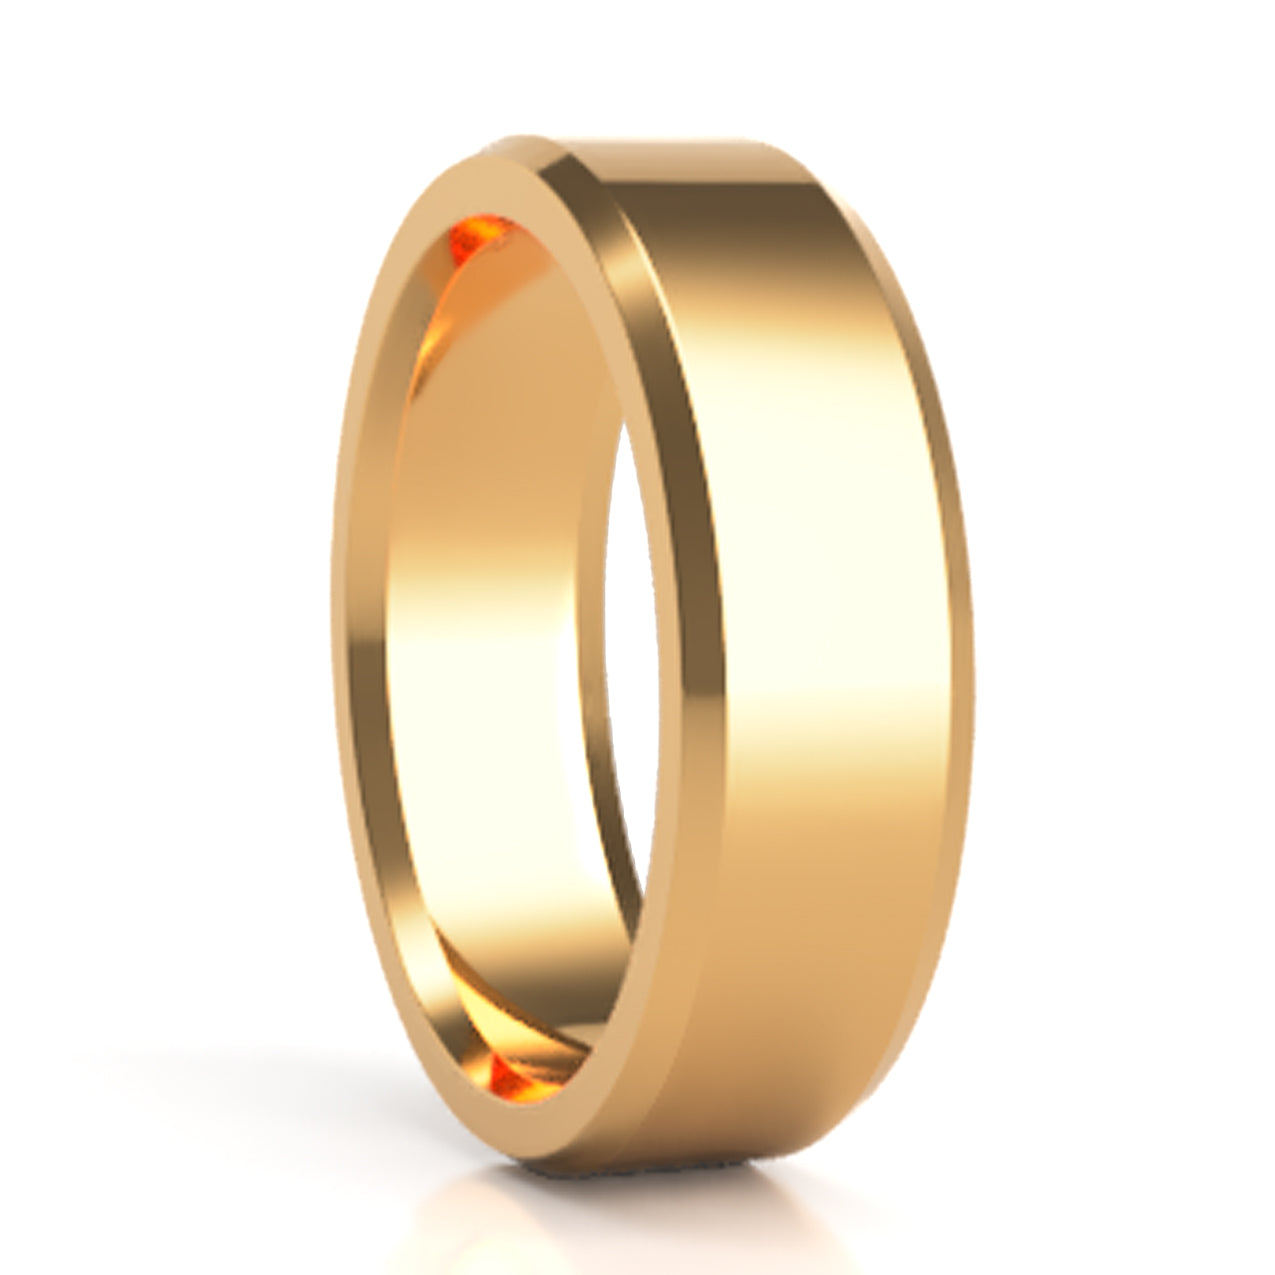 A solid 10k yellow gold classic style wedding band with beveled edges displayed on a neutral white background.